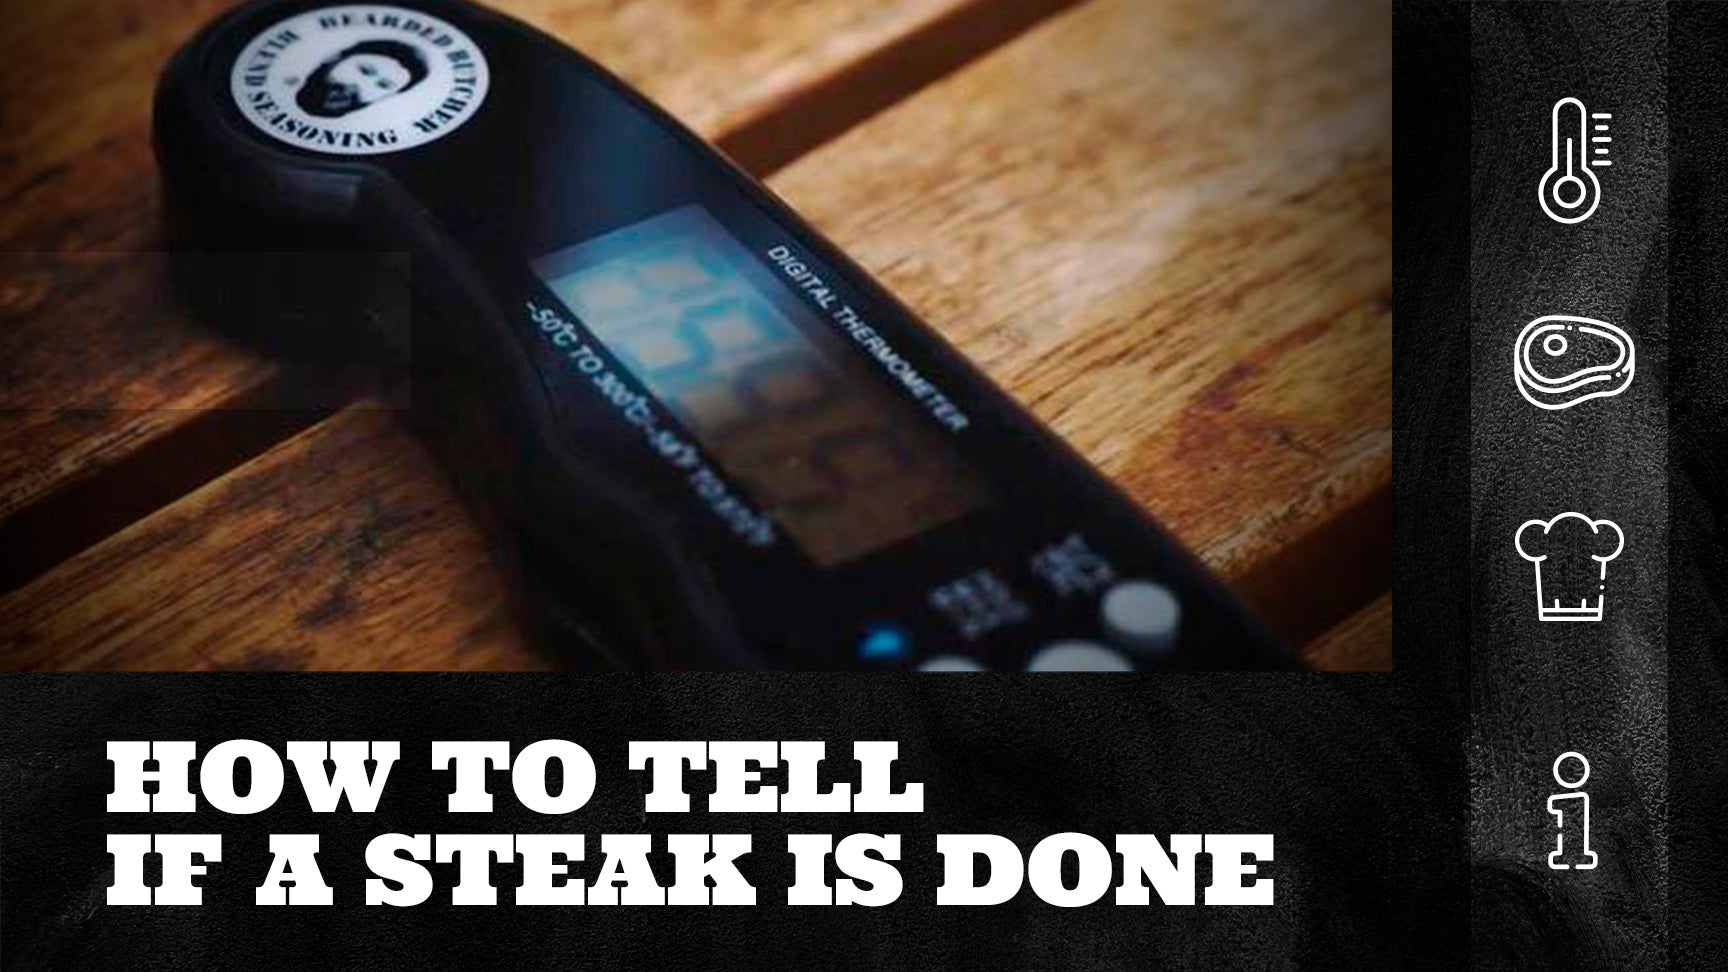 How to Test Meat for Doneness (Even Without a Thermometer)